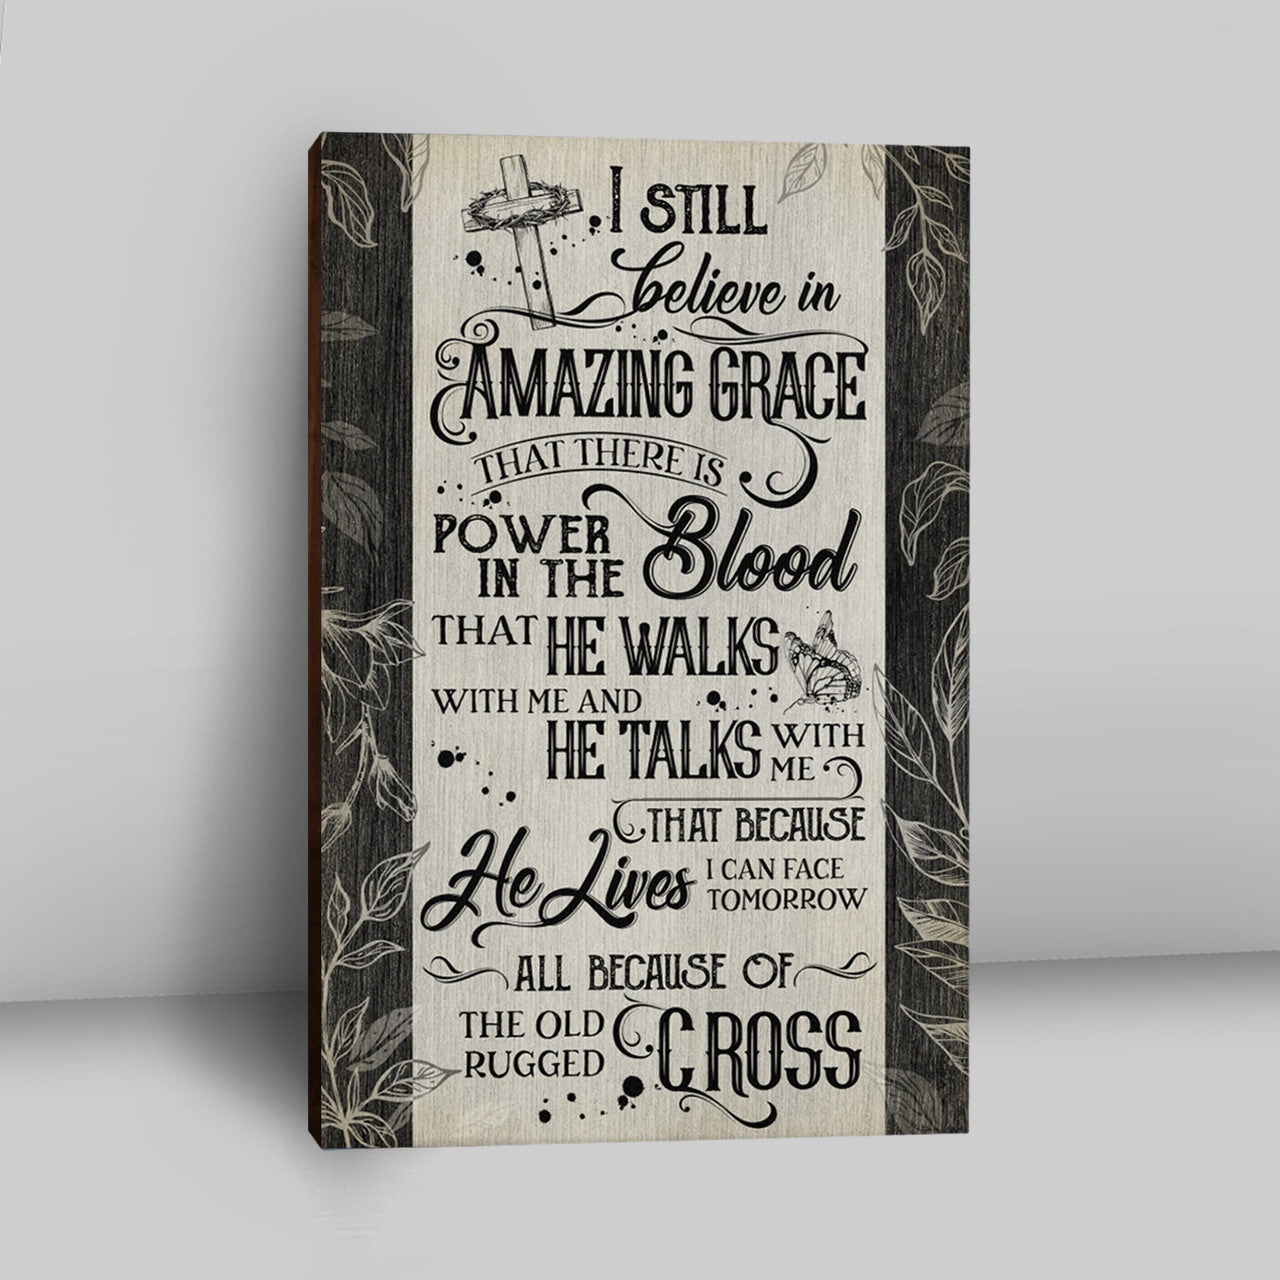 I Still Believe In Amazing Grace That There Is Power In The Blood All Because Of The Old Rugged Cross Christian Wall Art Decor